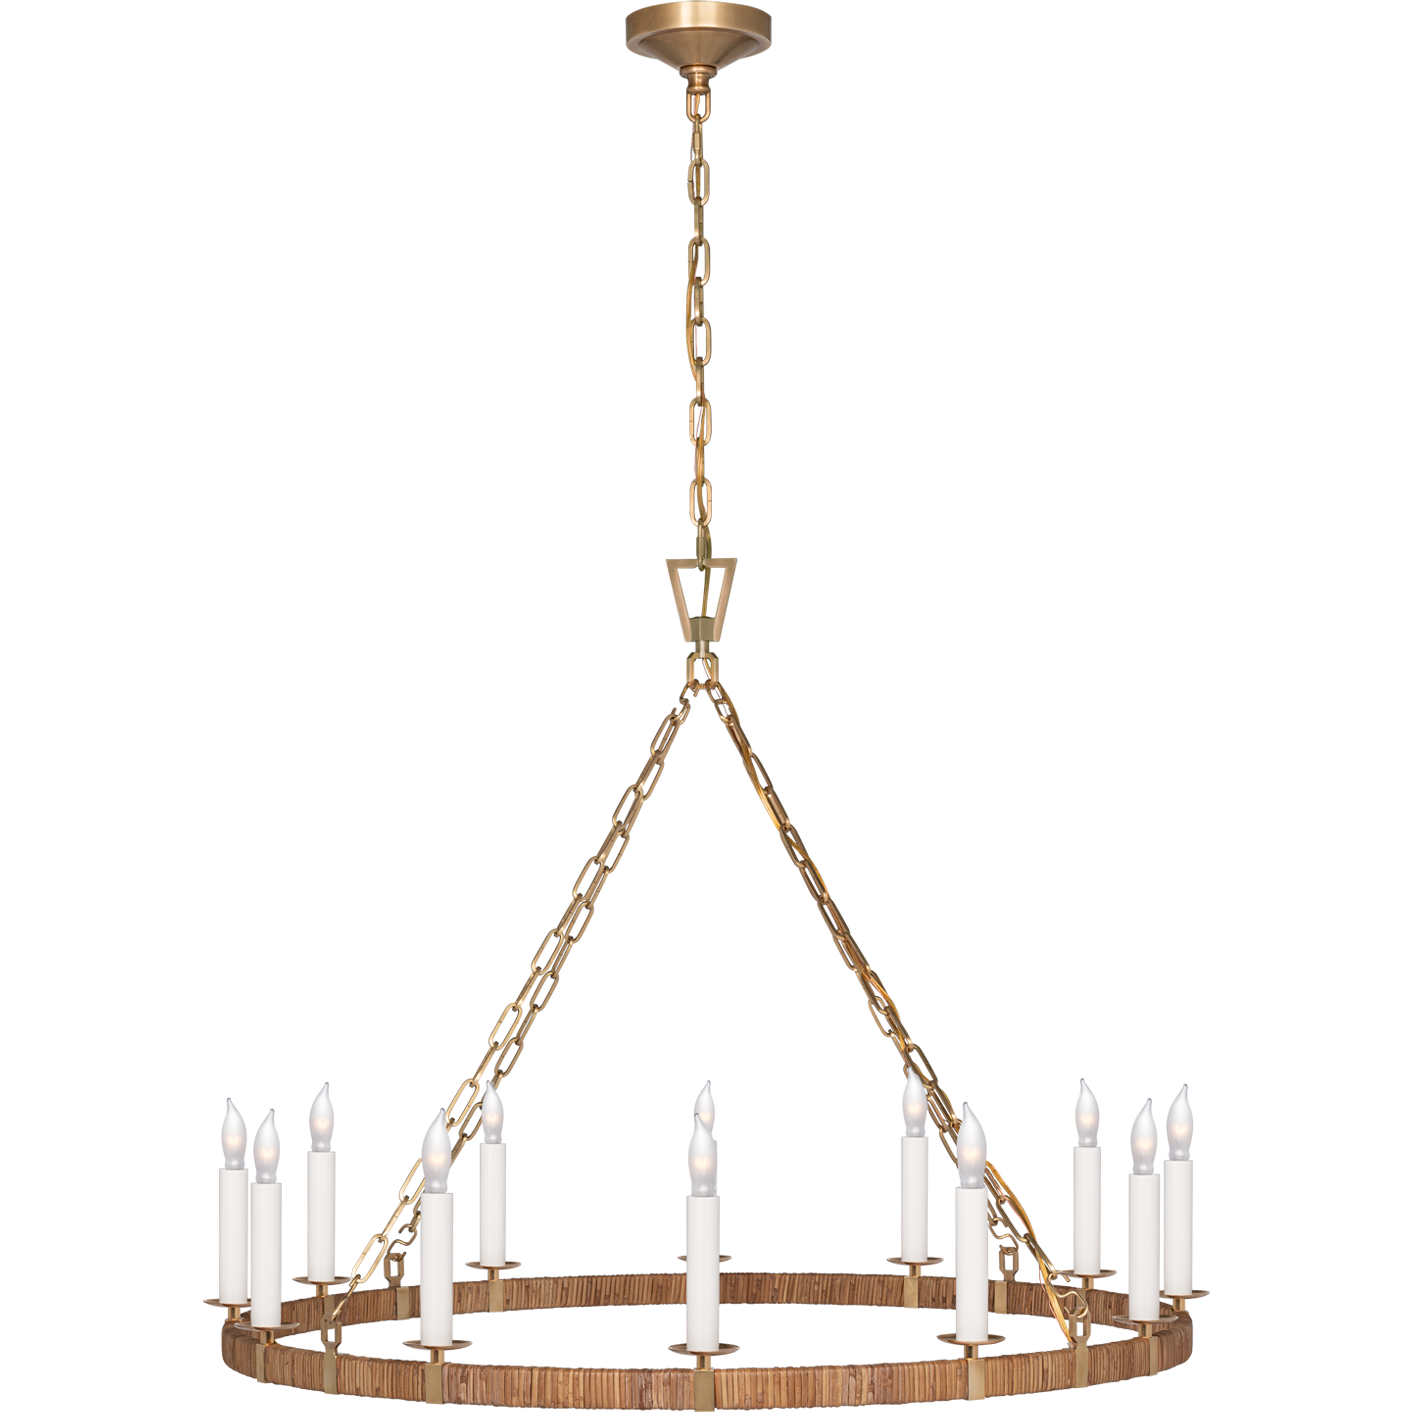 Darlana Large Wrapped Ring Chandelier